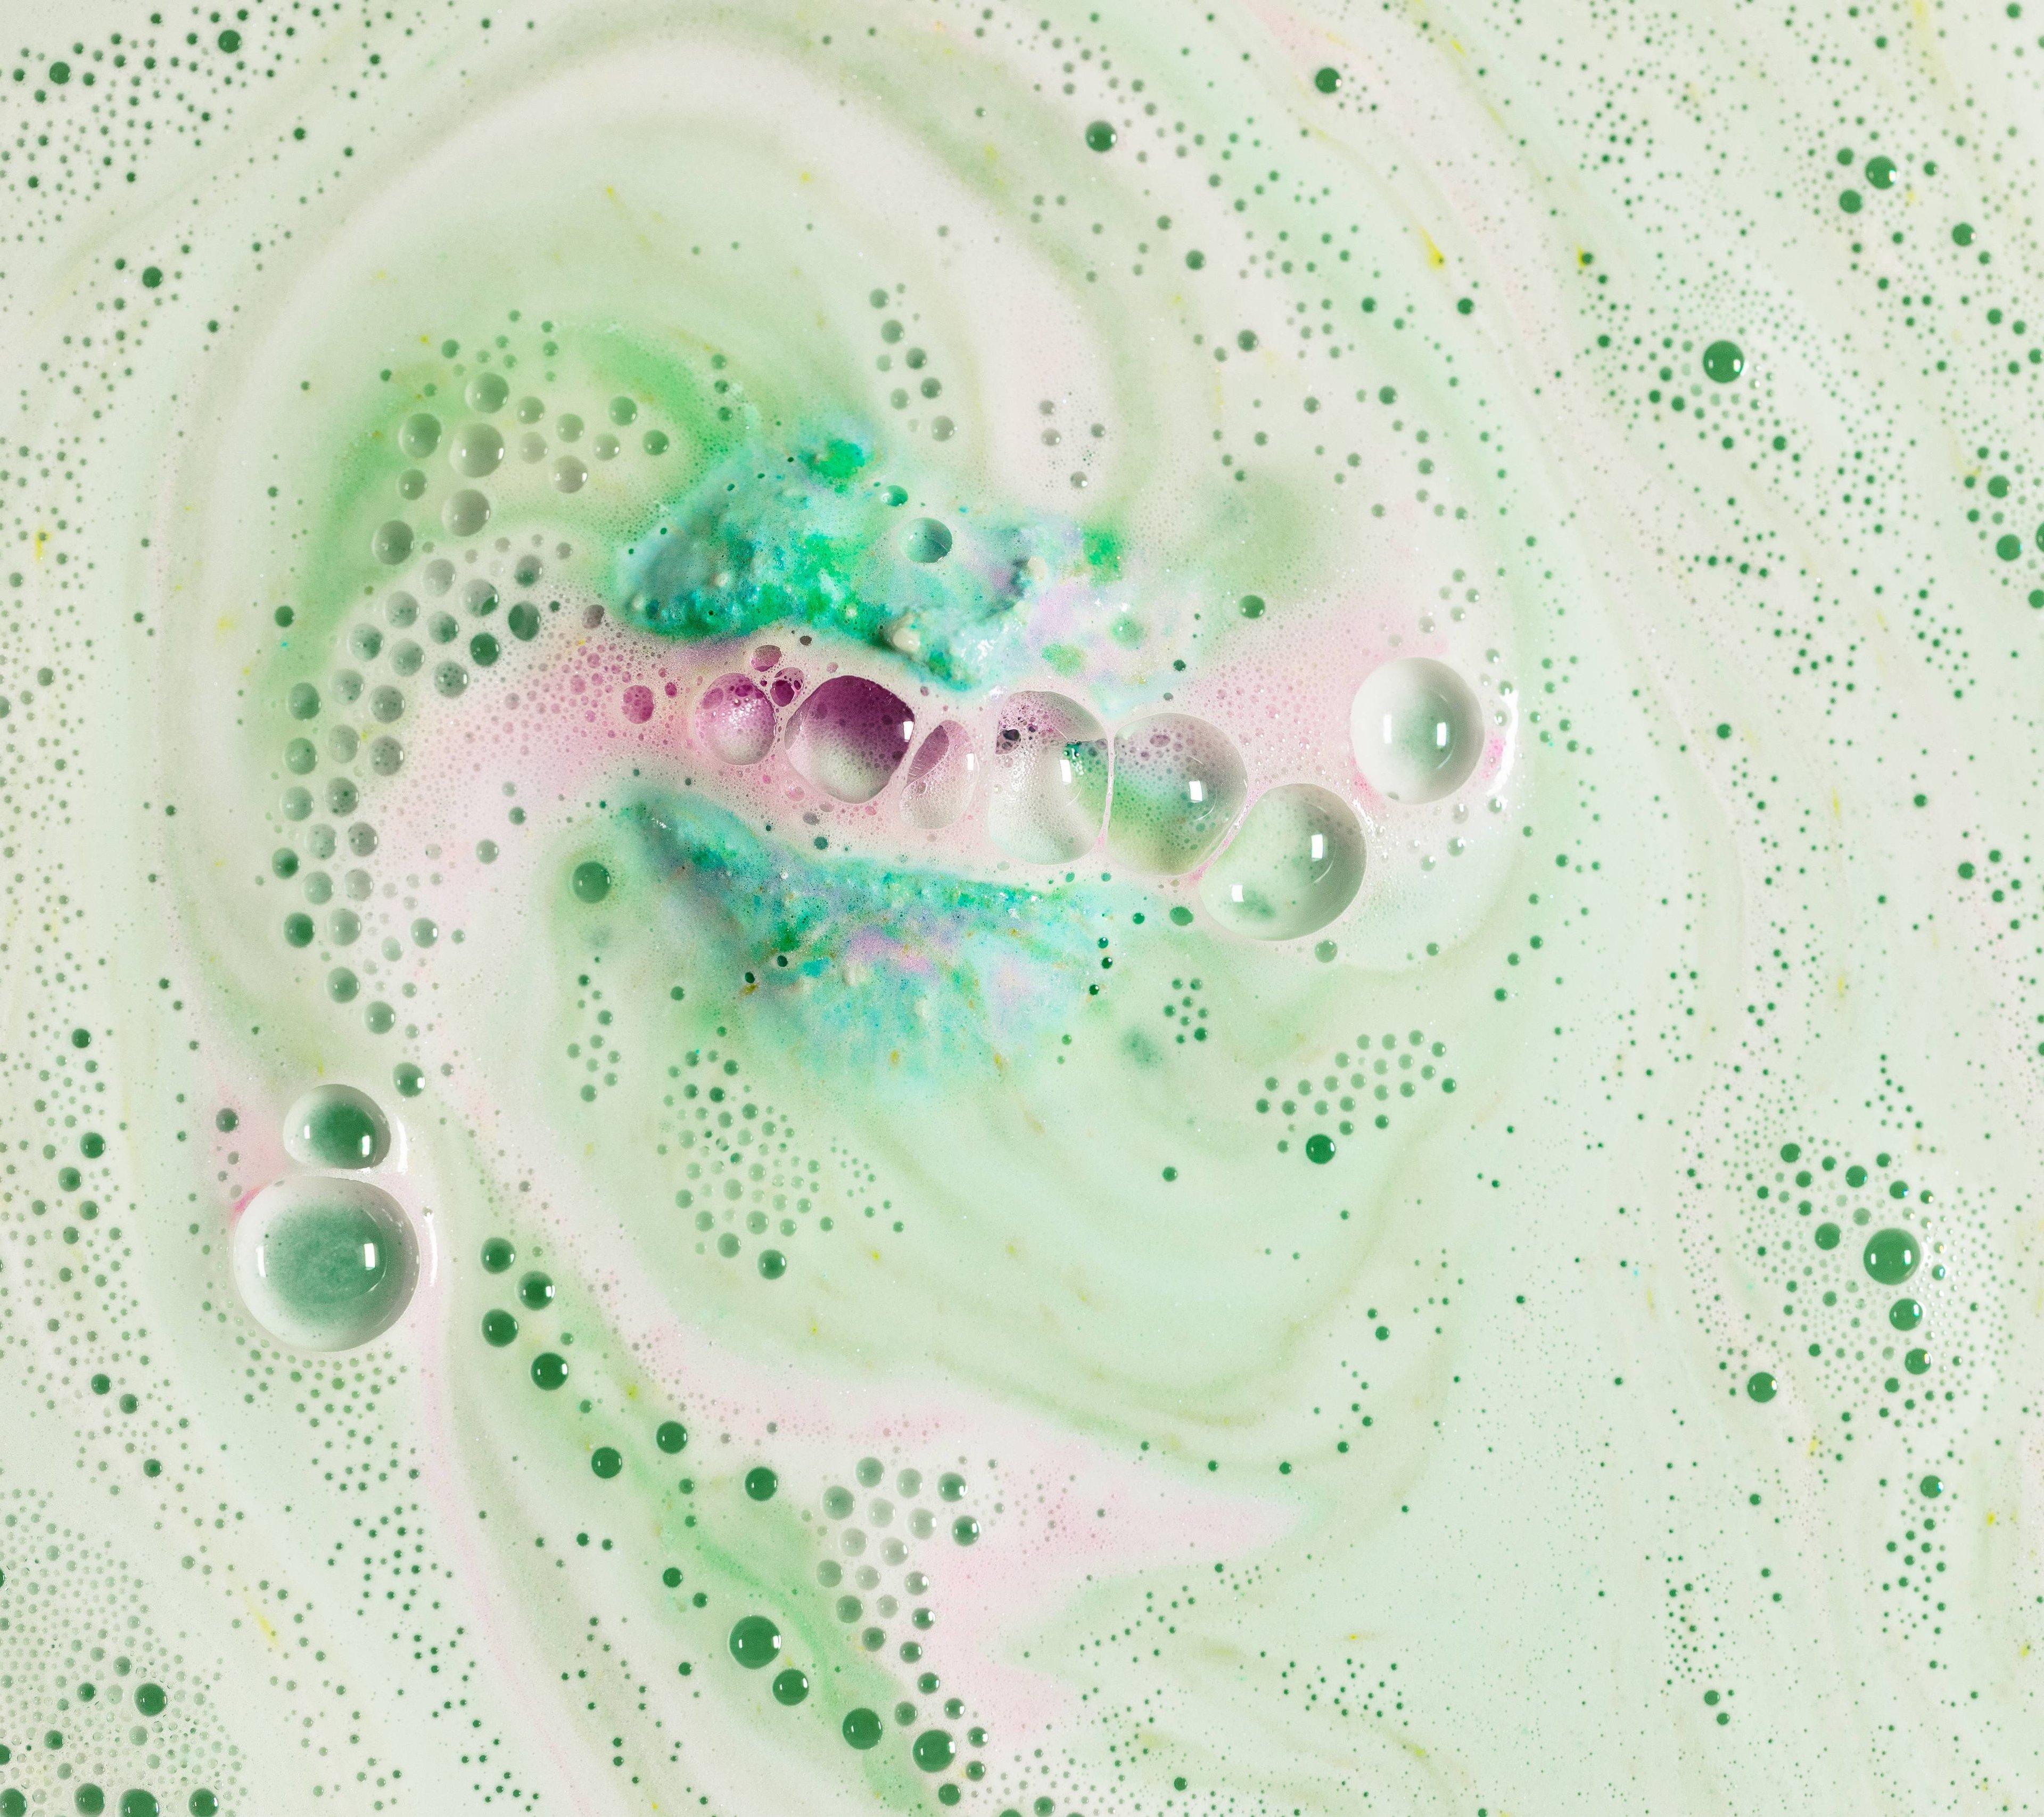 Lakes Bath Bomb dispersing lush, green, foamy, bubbles with a hint of pink and yellow.